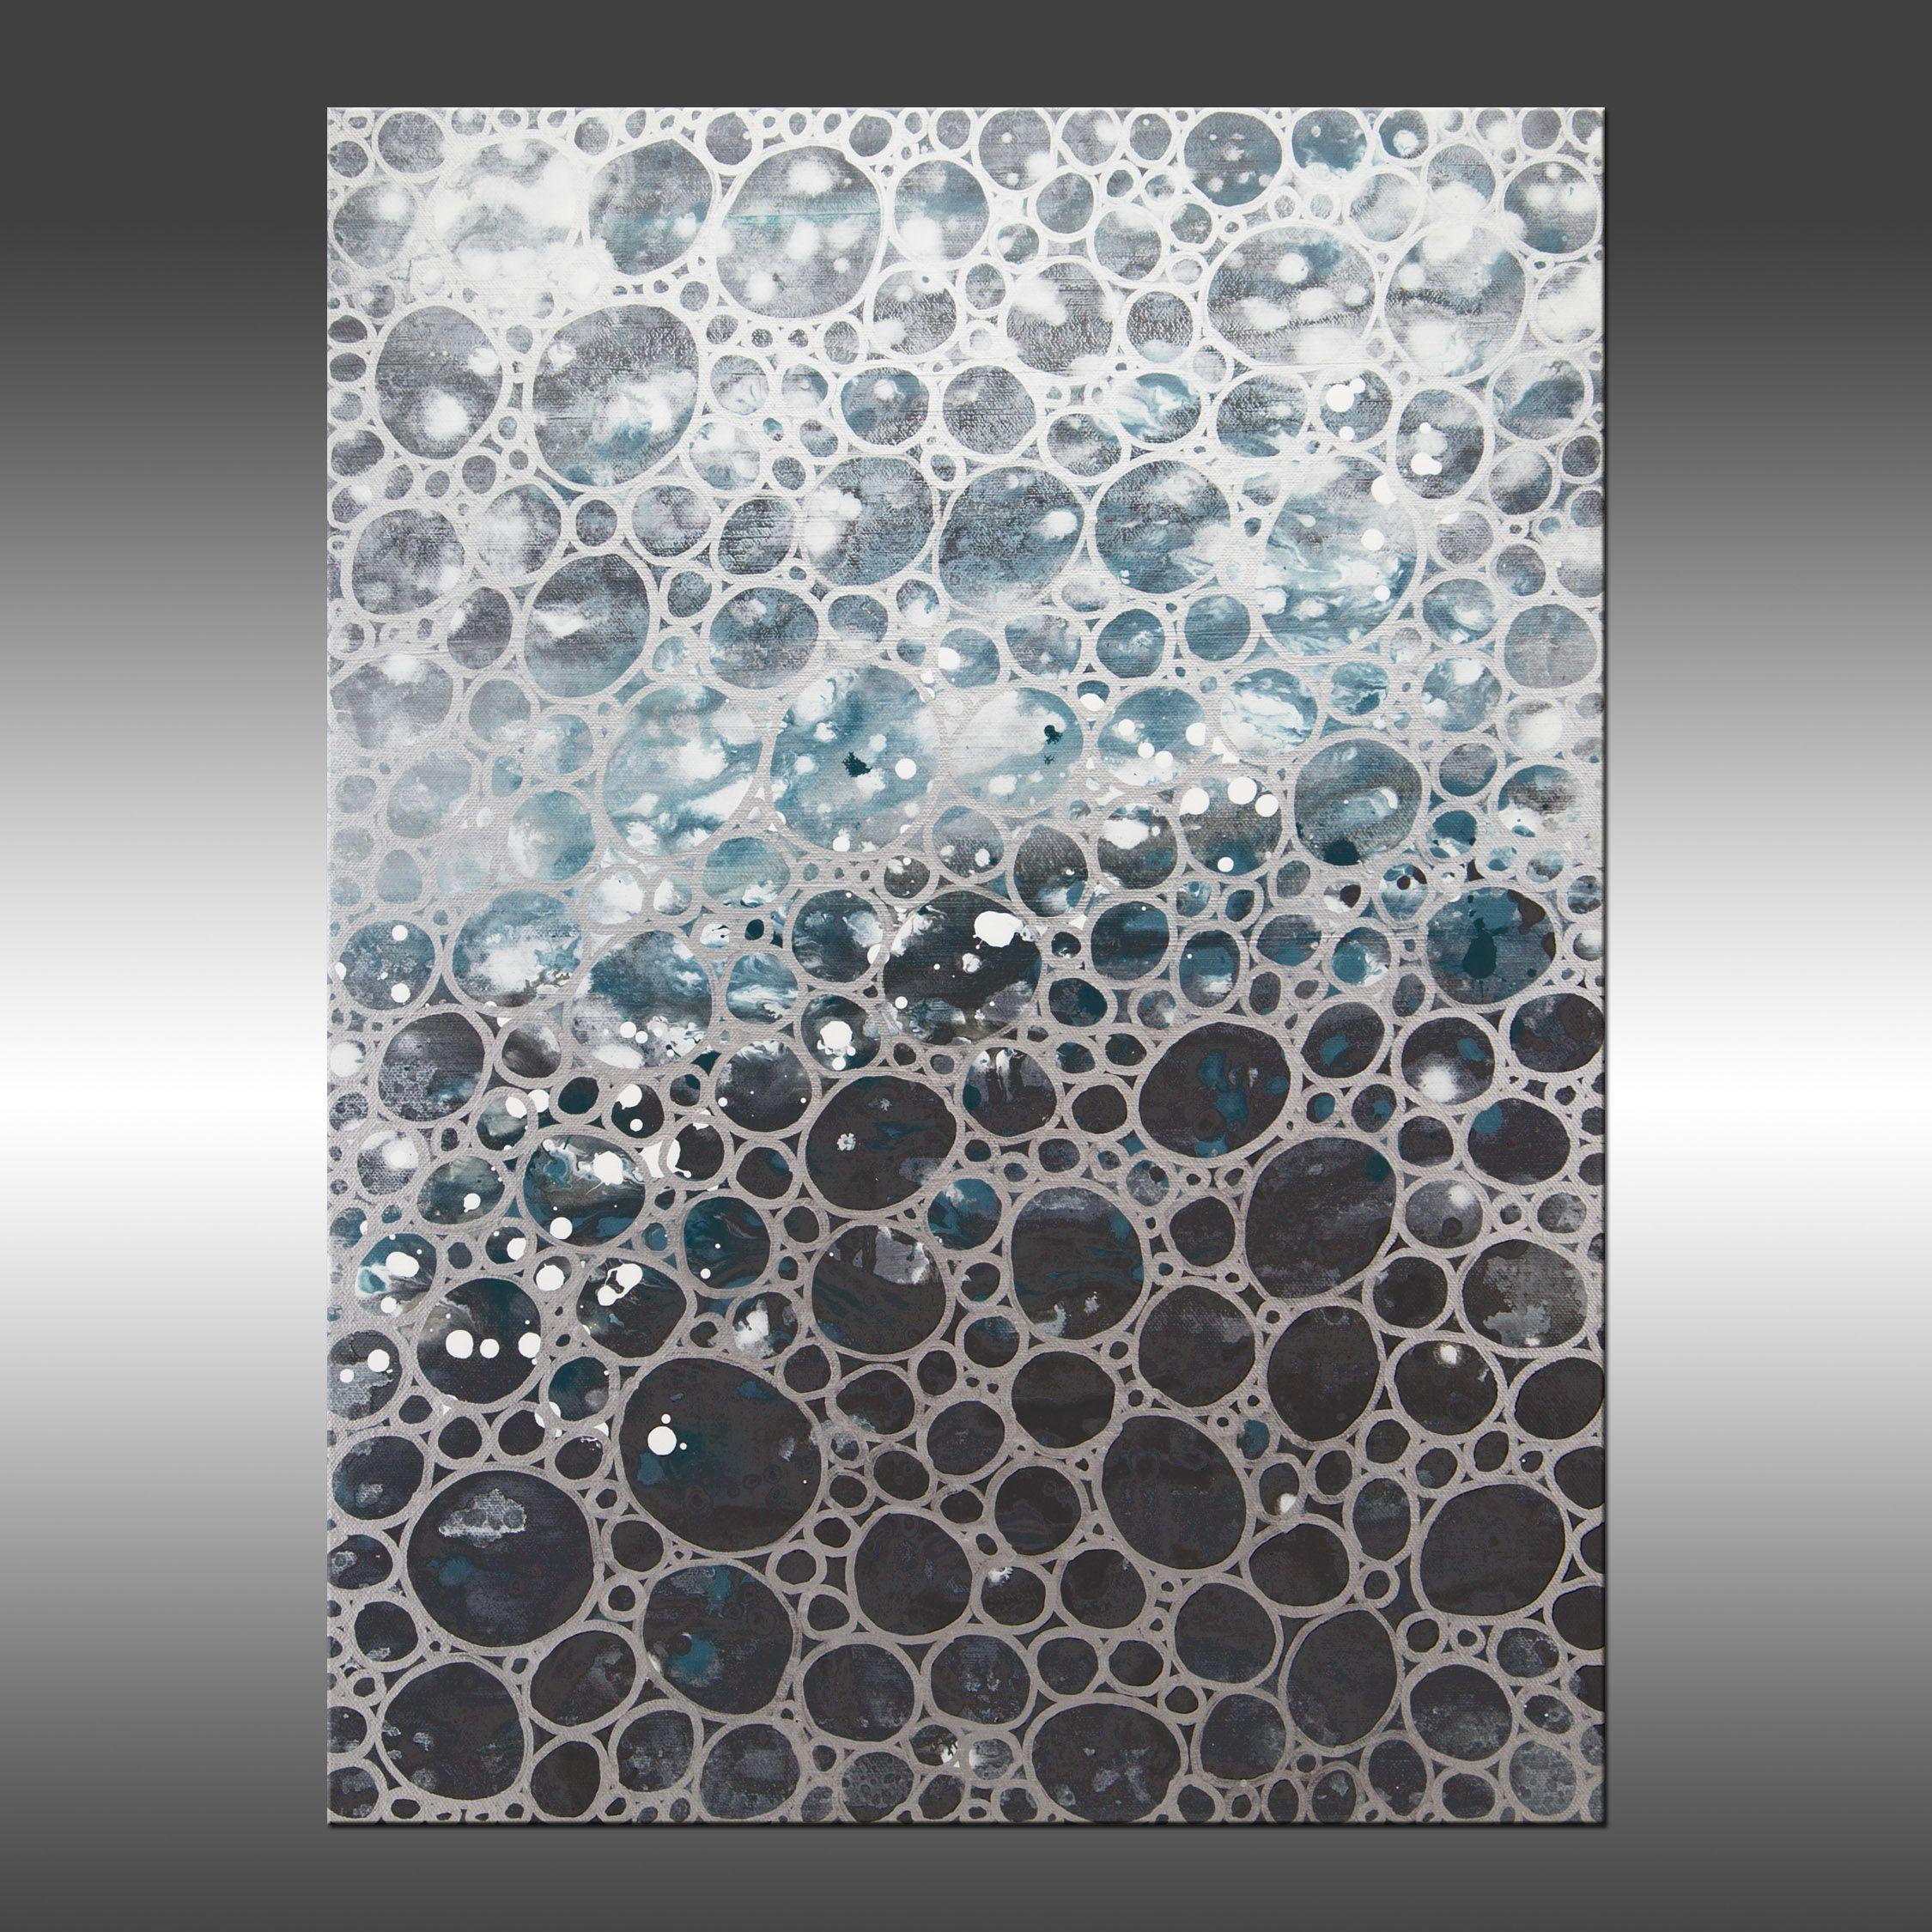 Dimension 38 is an original painting, created with acrylic paint on gallery-wrapped canvas. It has a width of 18 inches and a height of 24 inches with a depth of 1 inch (18x24x1).     The colors used in the painting are gray, white, smoky blue, and